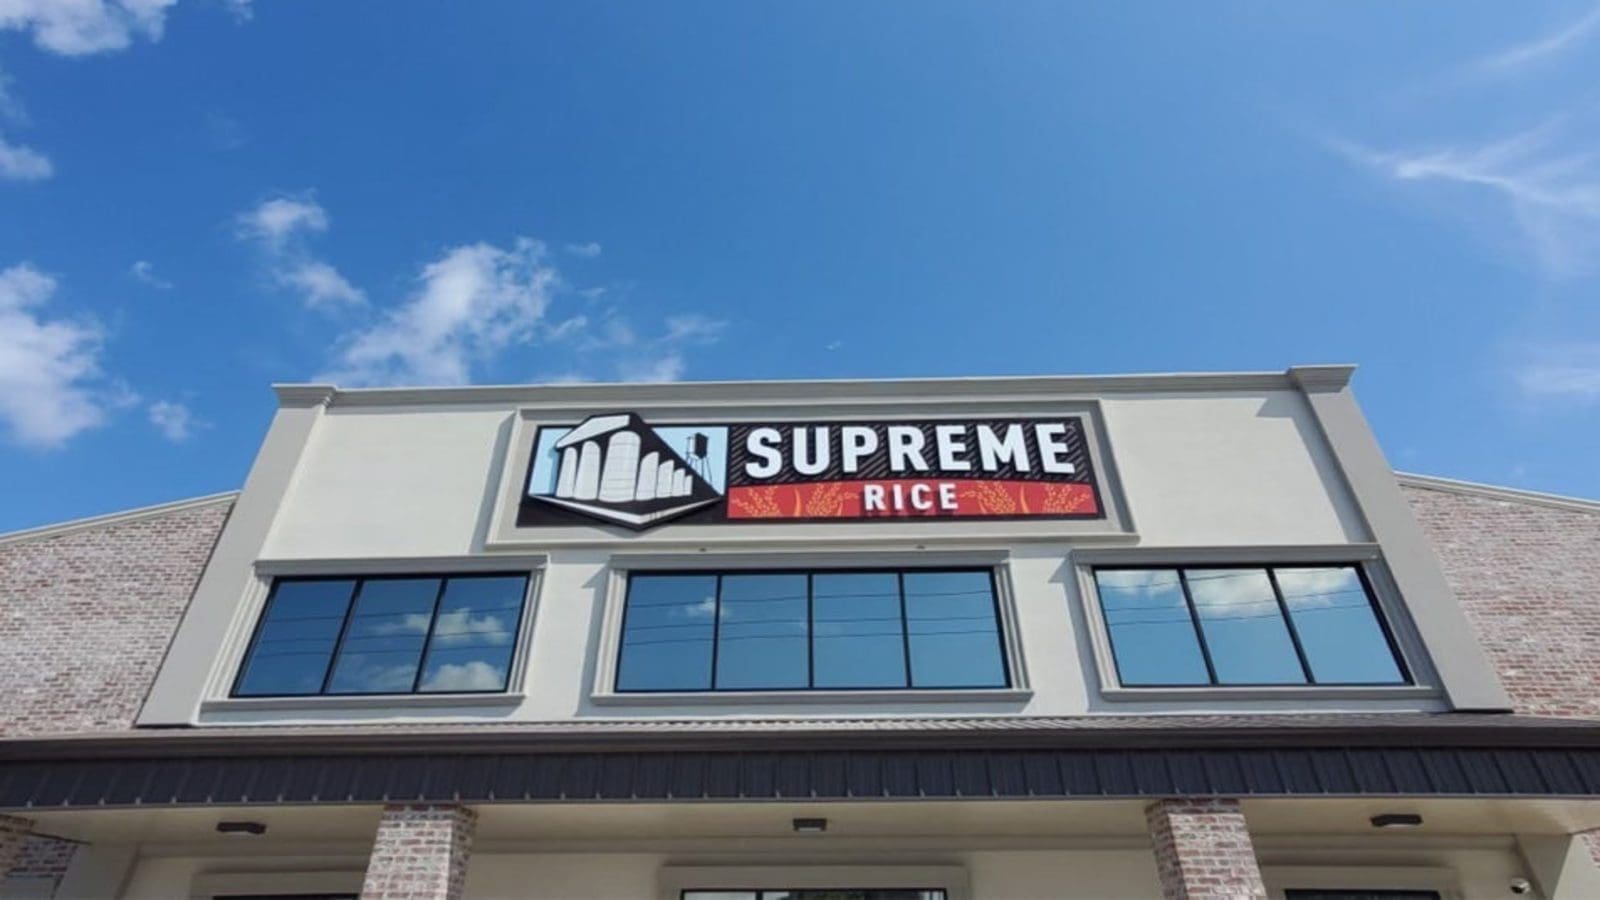 Supreme Rice invests US$16.2 m to expand milling operations in Louisiana